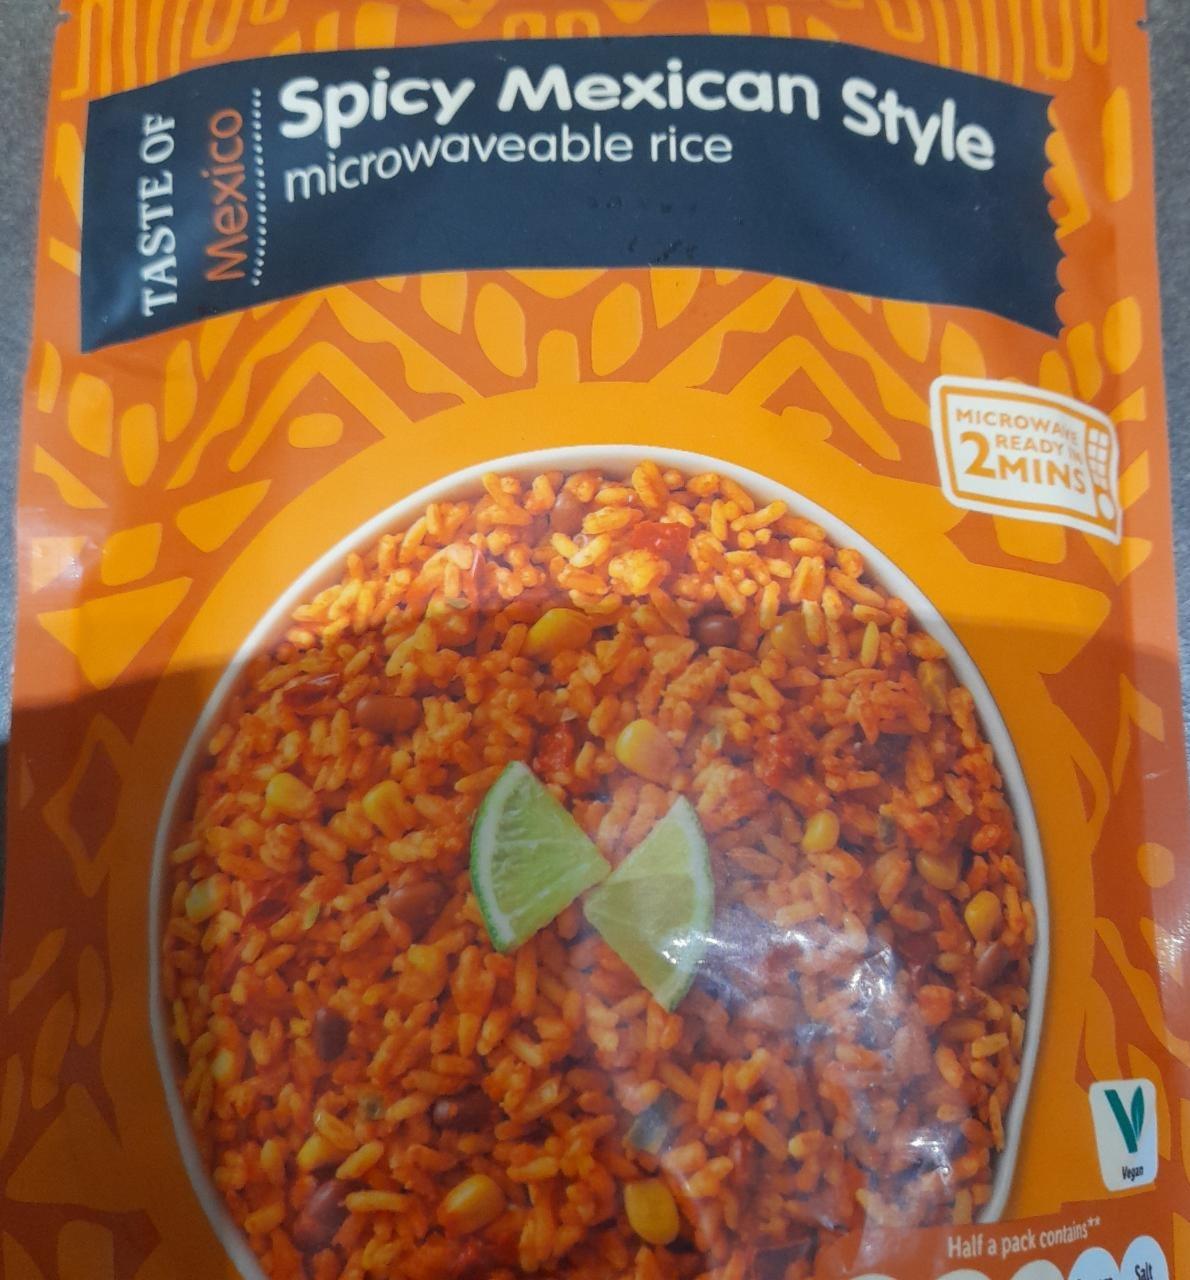 Fotografie - Spicy Mexican Style microwaveable rice Taste of Mexico